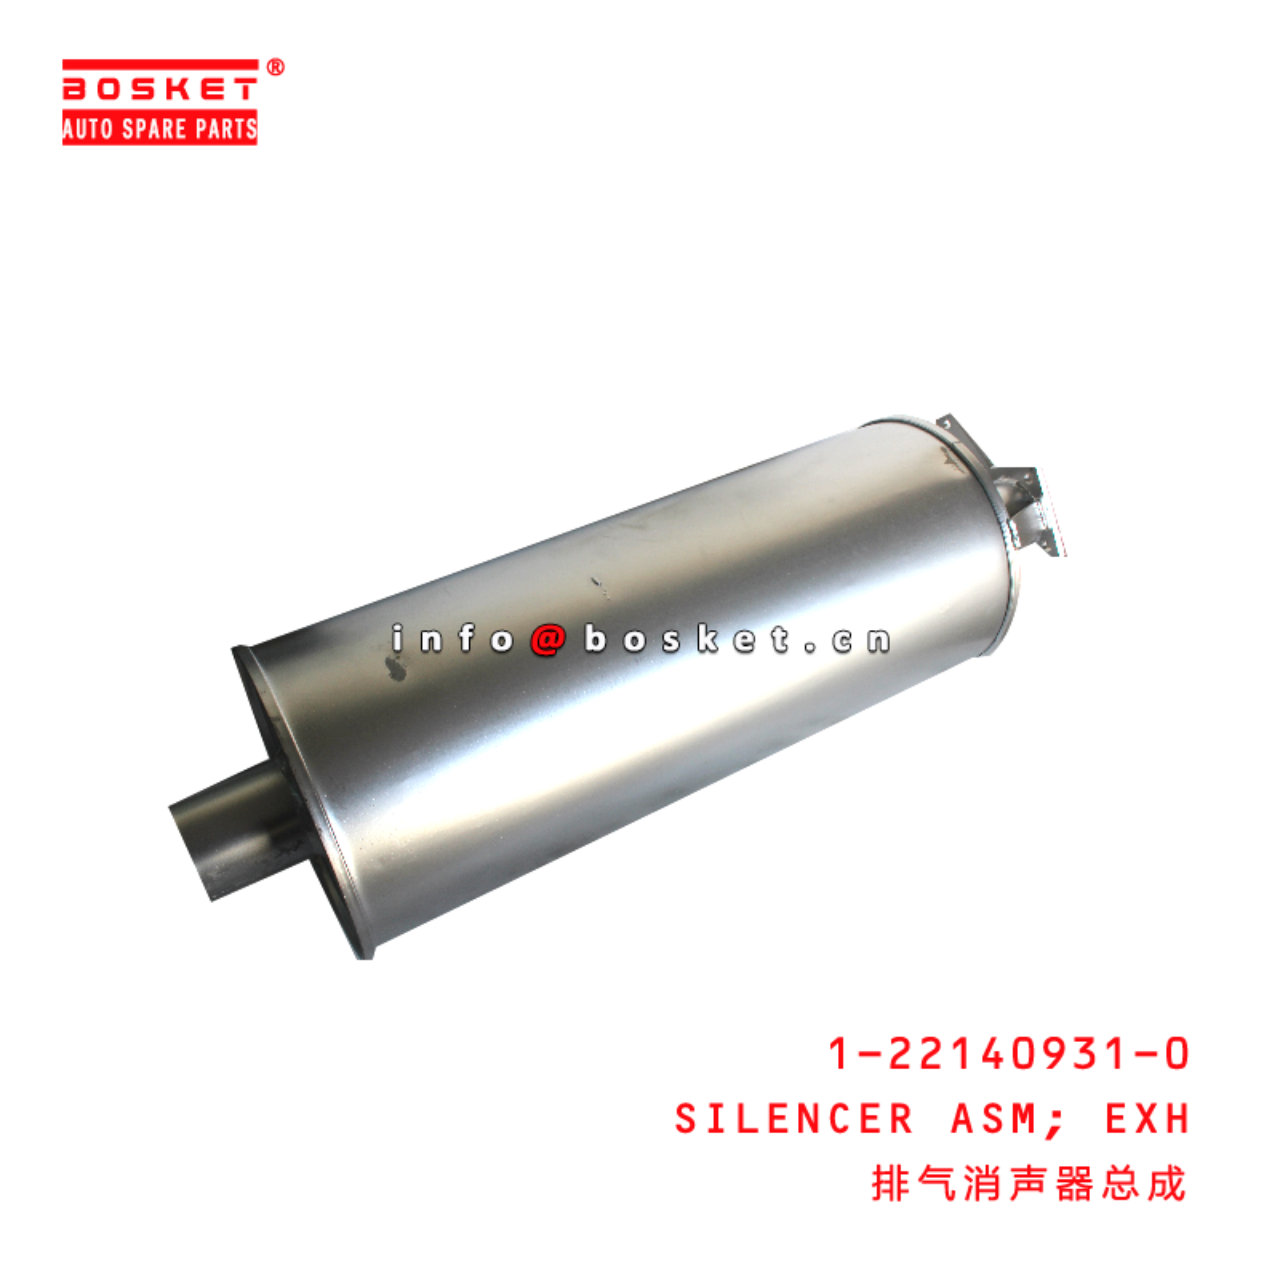 1-22140931-0 Exhaust Silencer Assembly suitable for ISUZU   1221409310